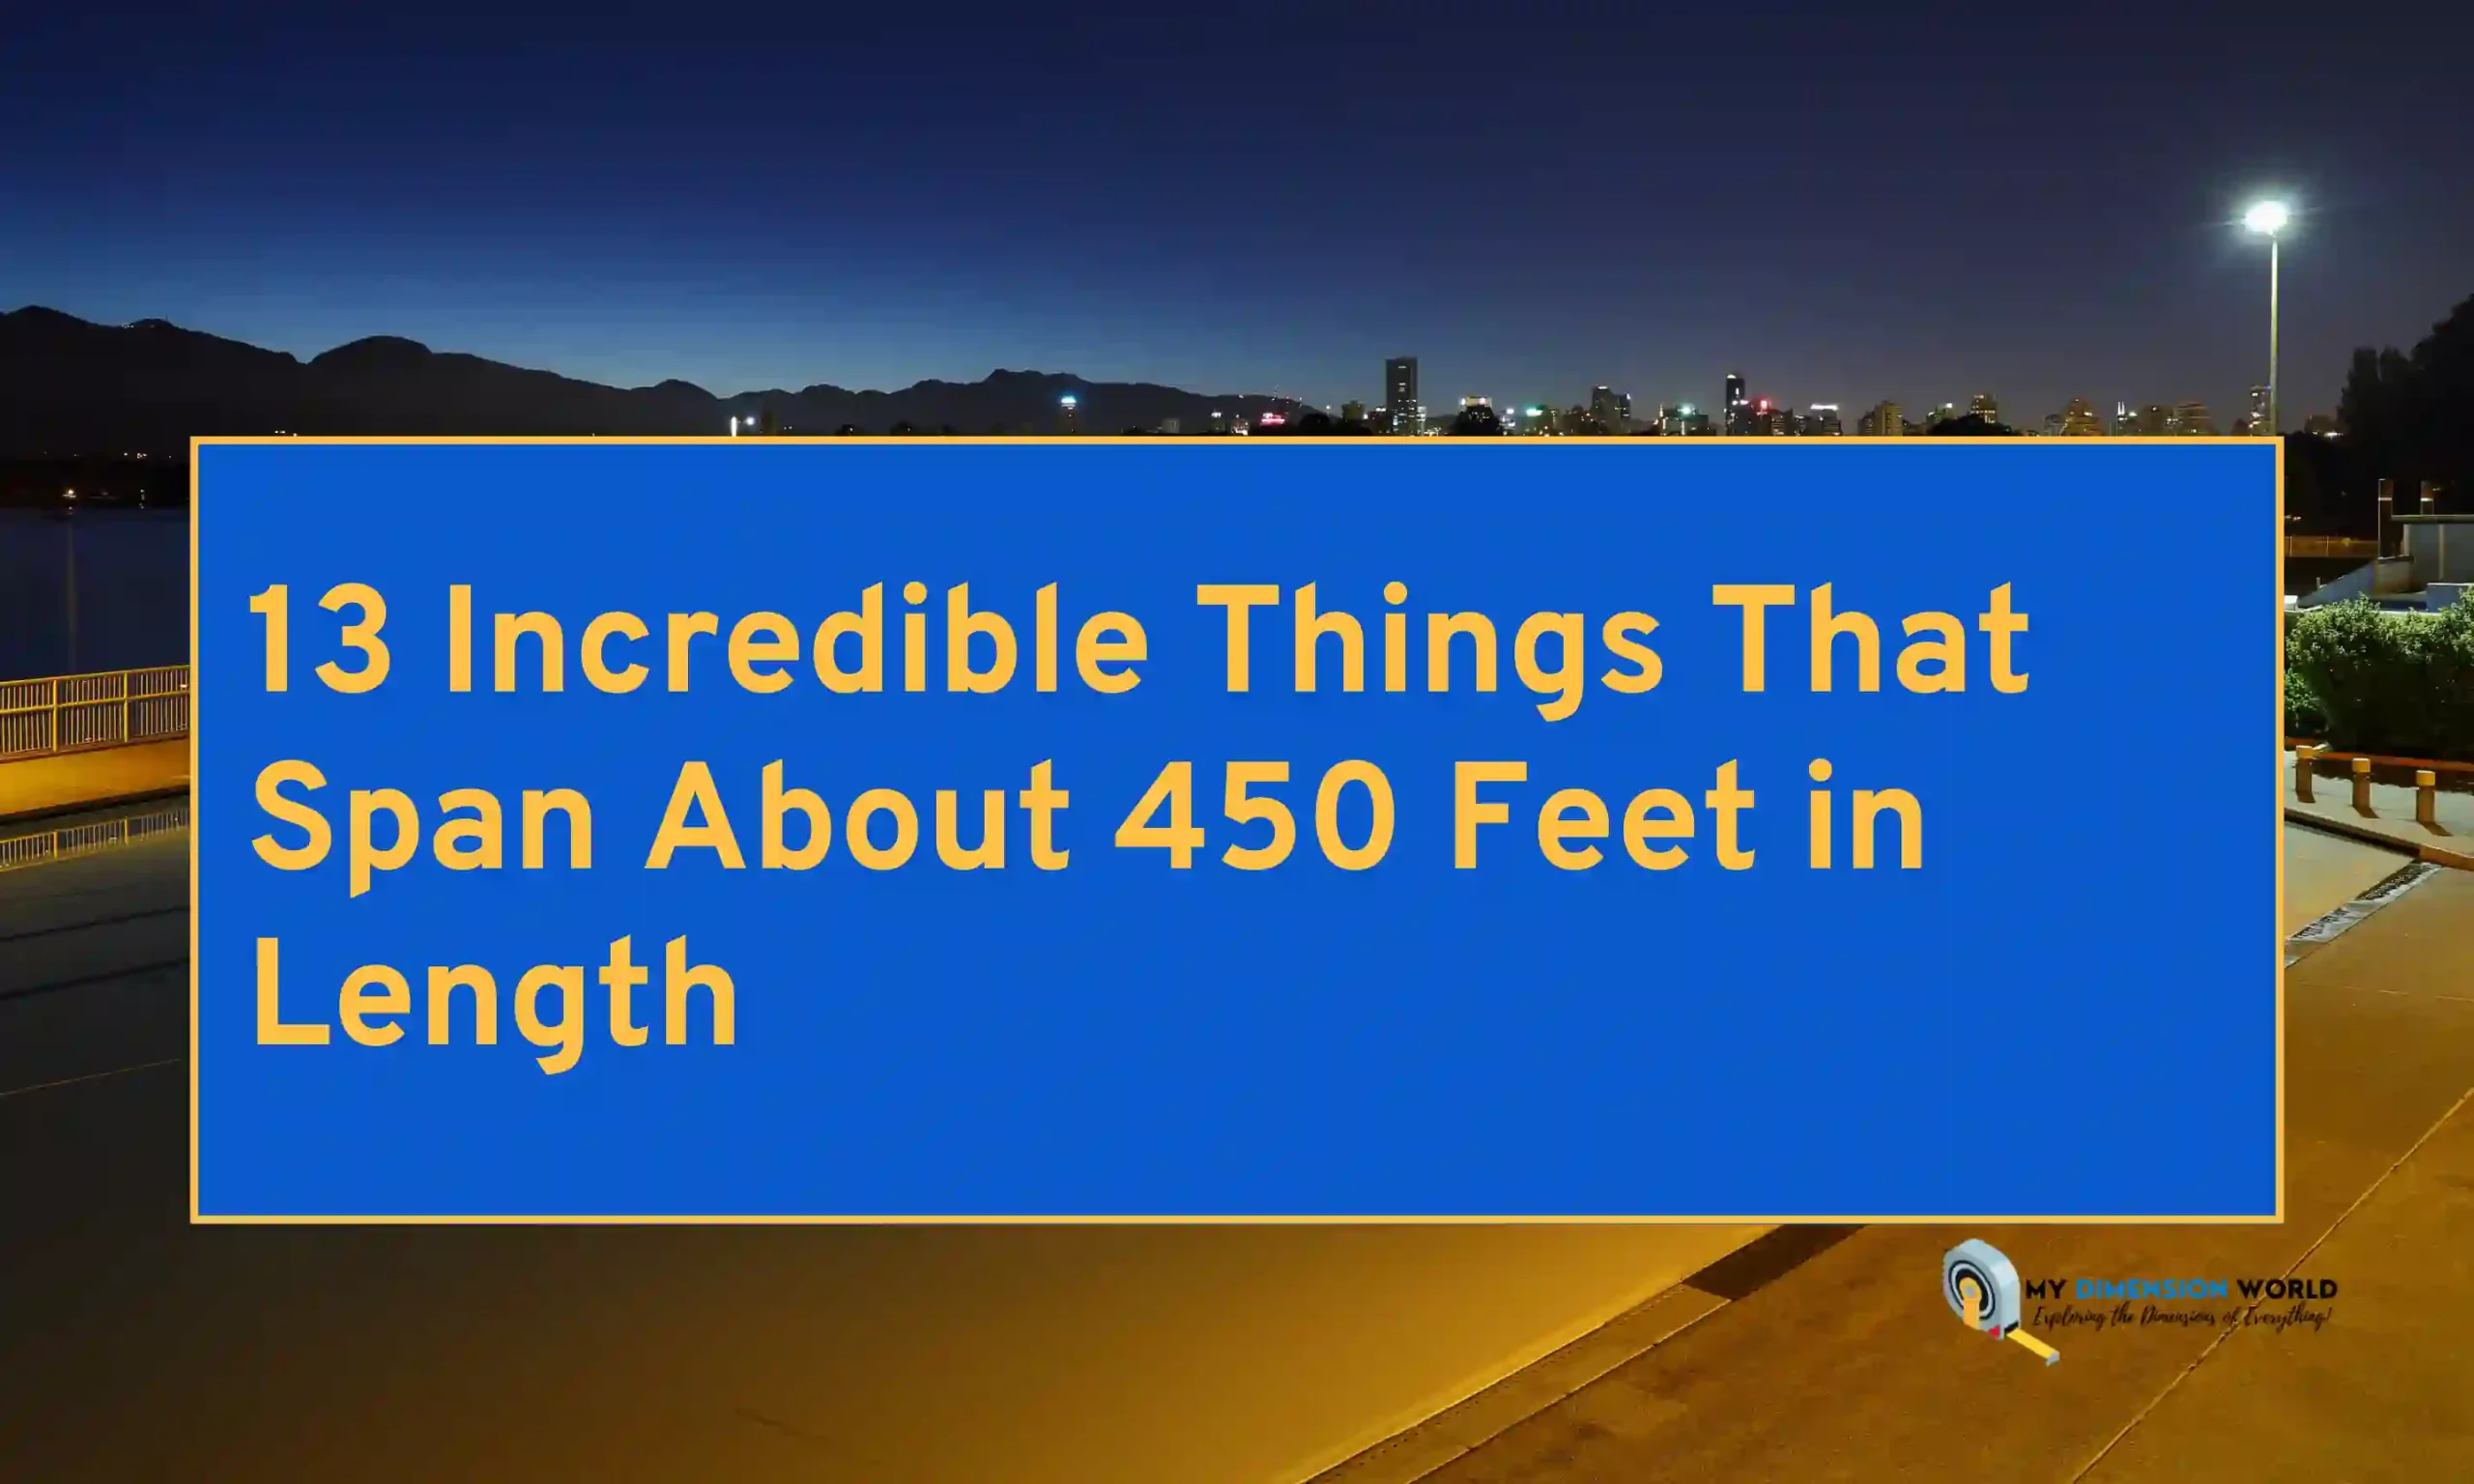 13 Incredible Things That Span About 450 Feet in Length